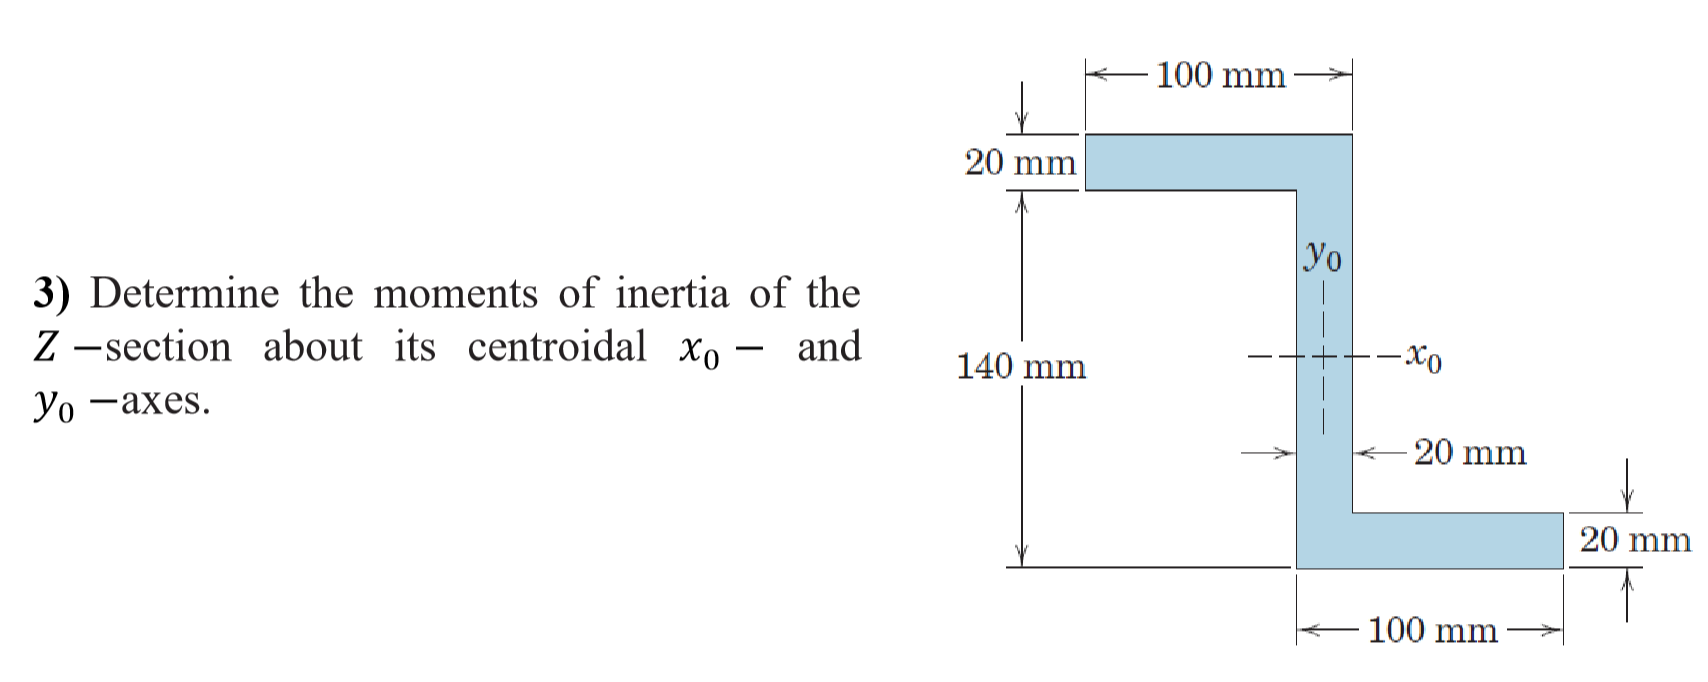 3) Determine the moments of inertia of the
Z -section about its centroidal xo - and
Уо —ахes.
